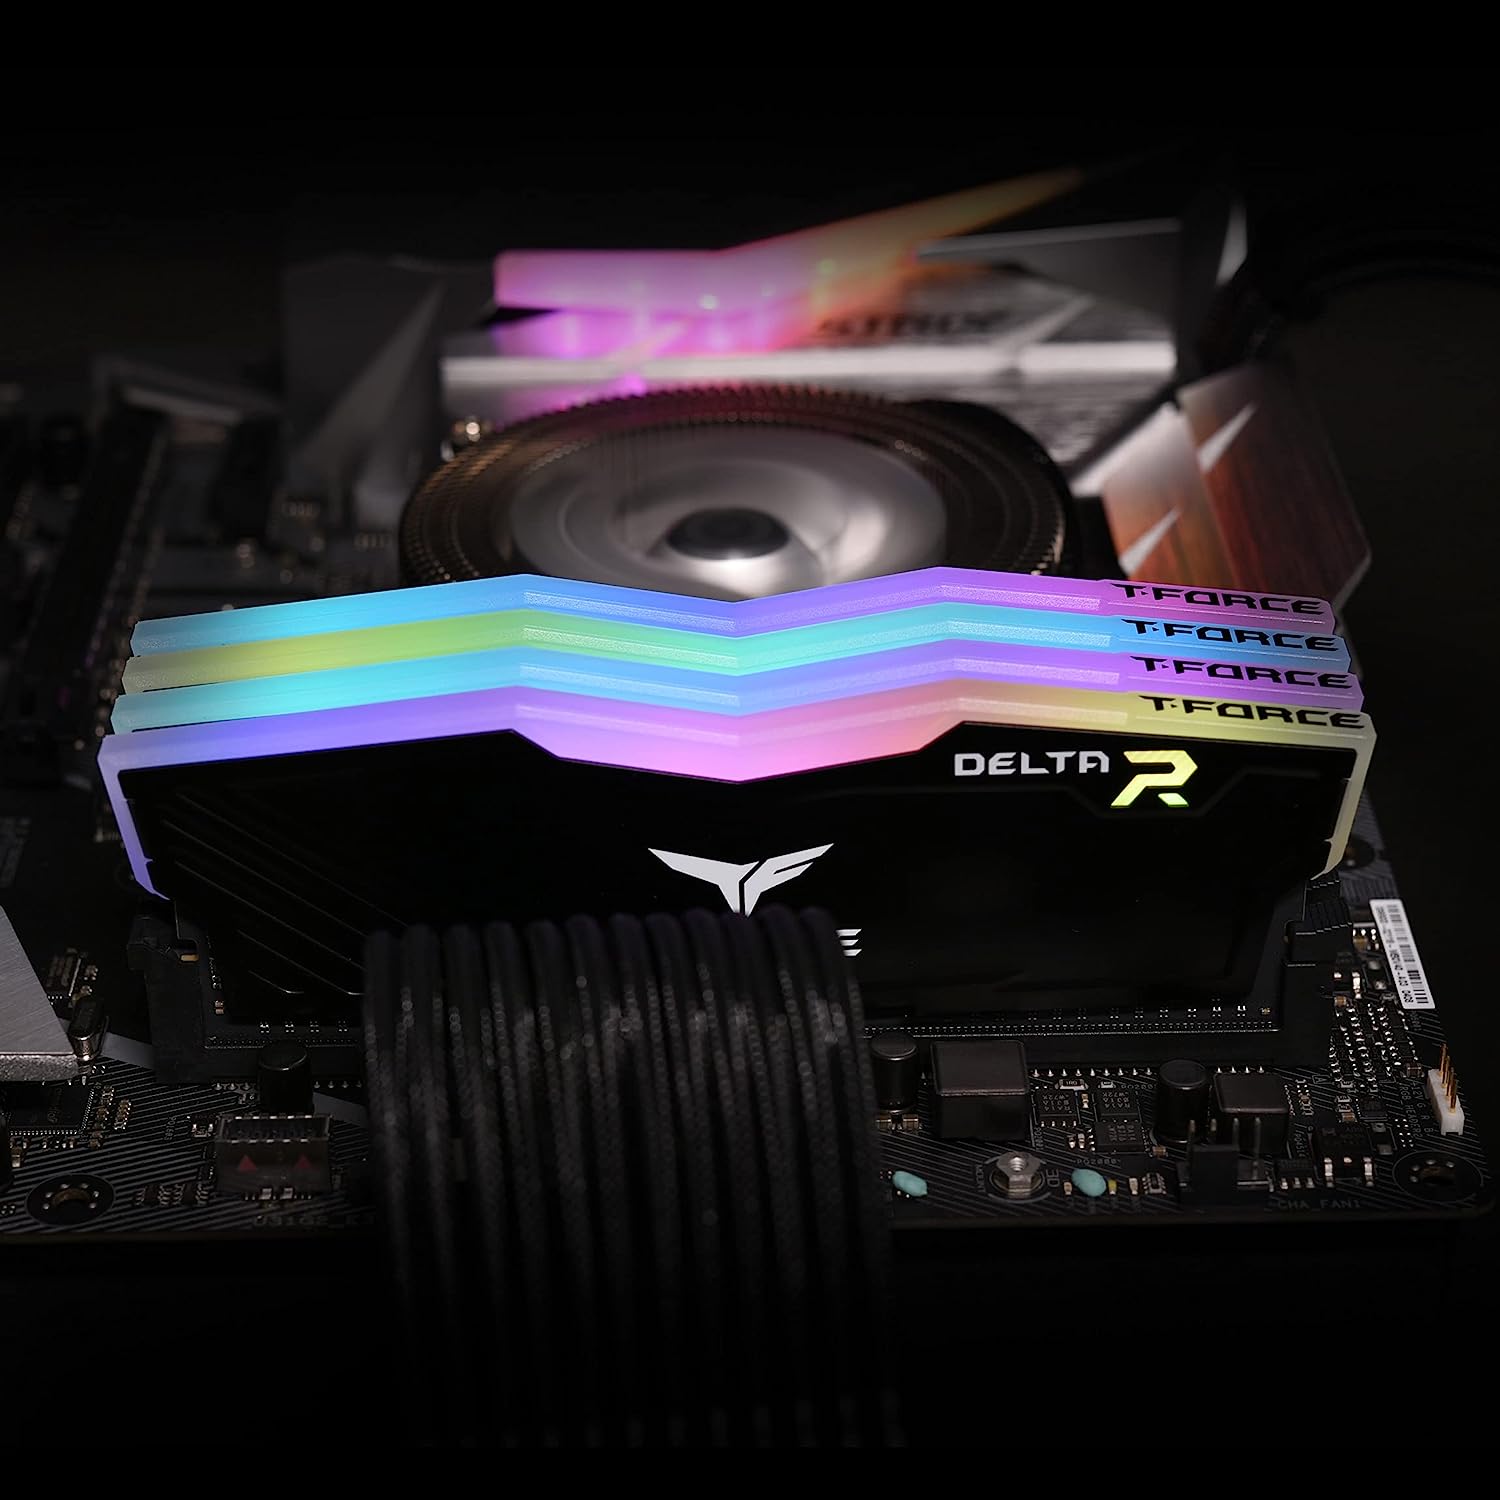 Team T-Force Delta RGB DDR4 Gaming Memory - Brand: TEAMGROUP, Color: Black, Form Factor: DIMM. 0765441651777